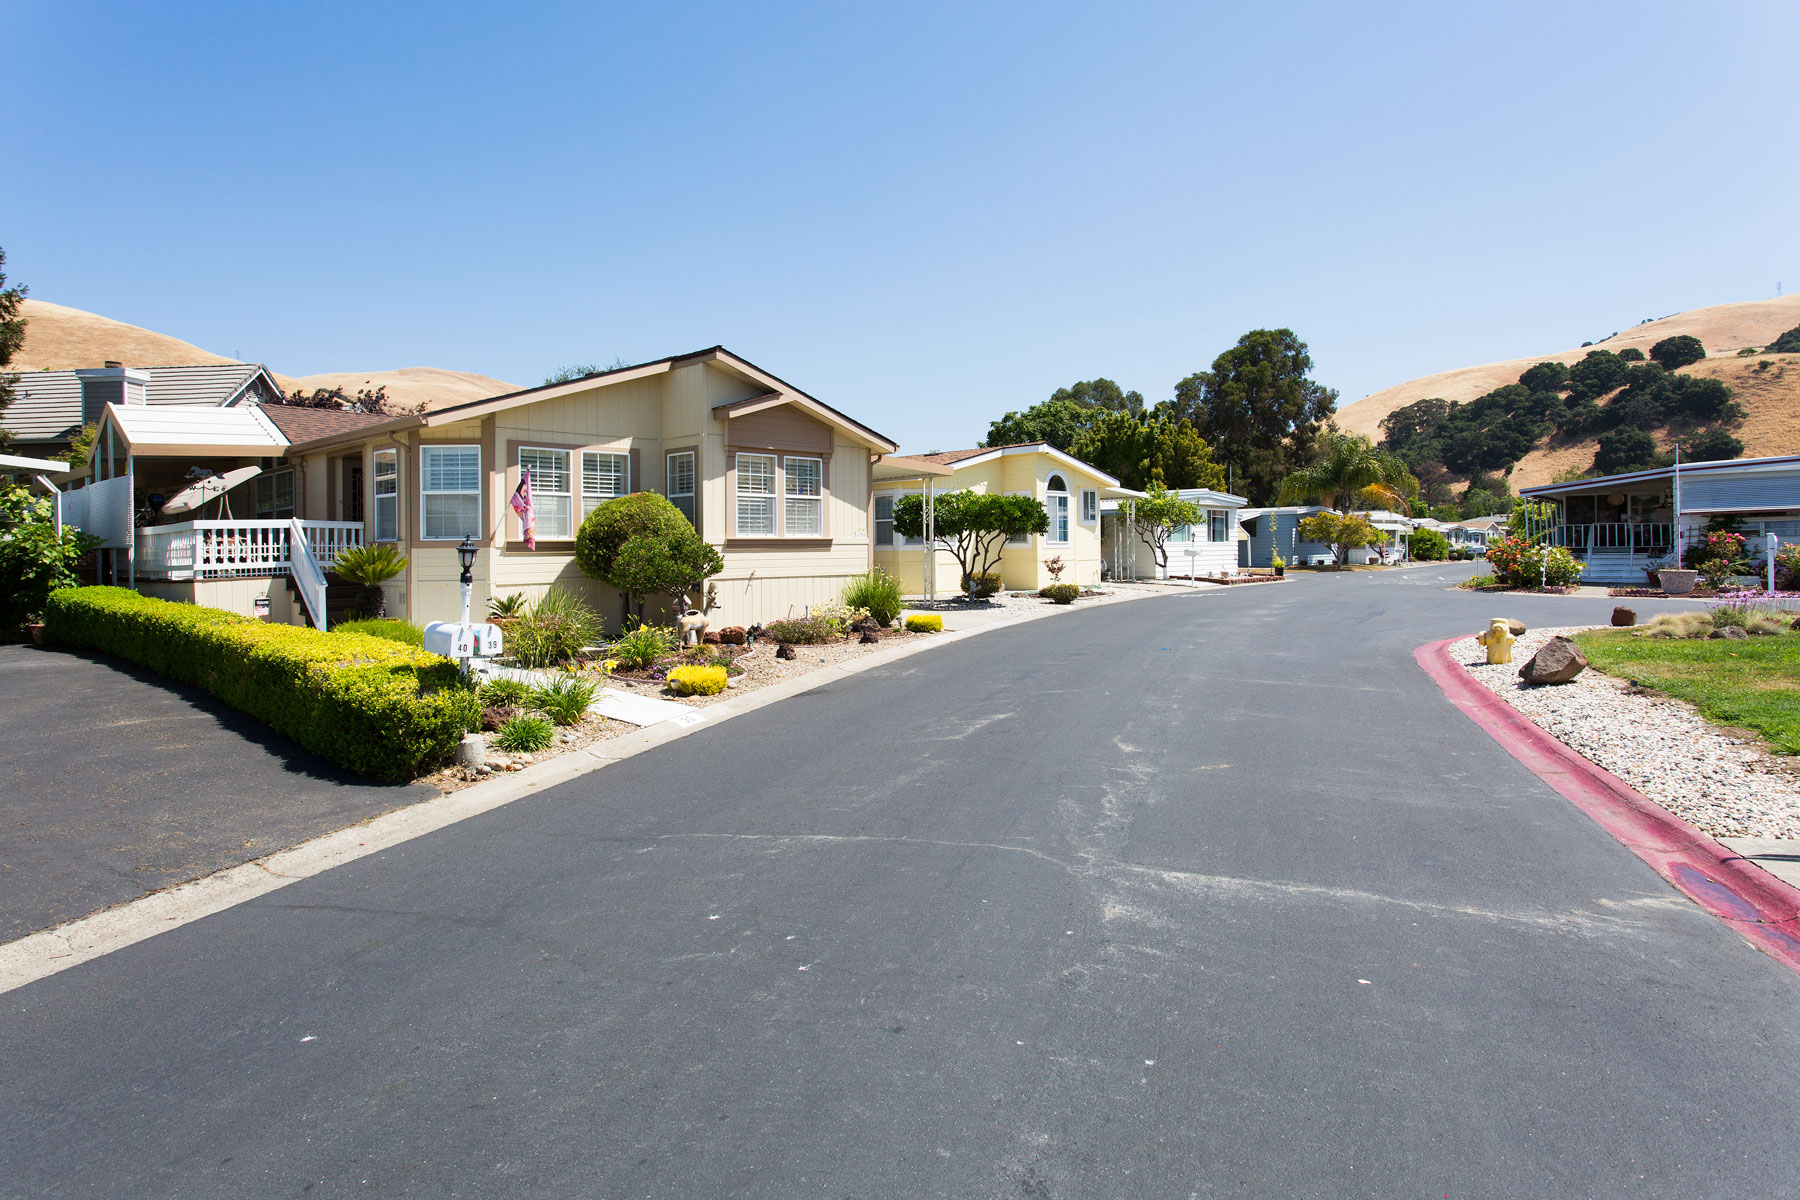 Wide, paved streets are lined with beautiful manufactured homes. Each home has a well-maintained, green front landscape